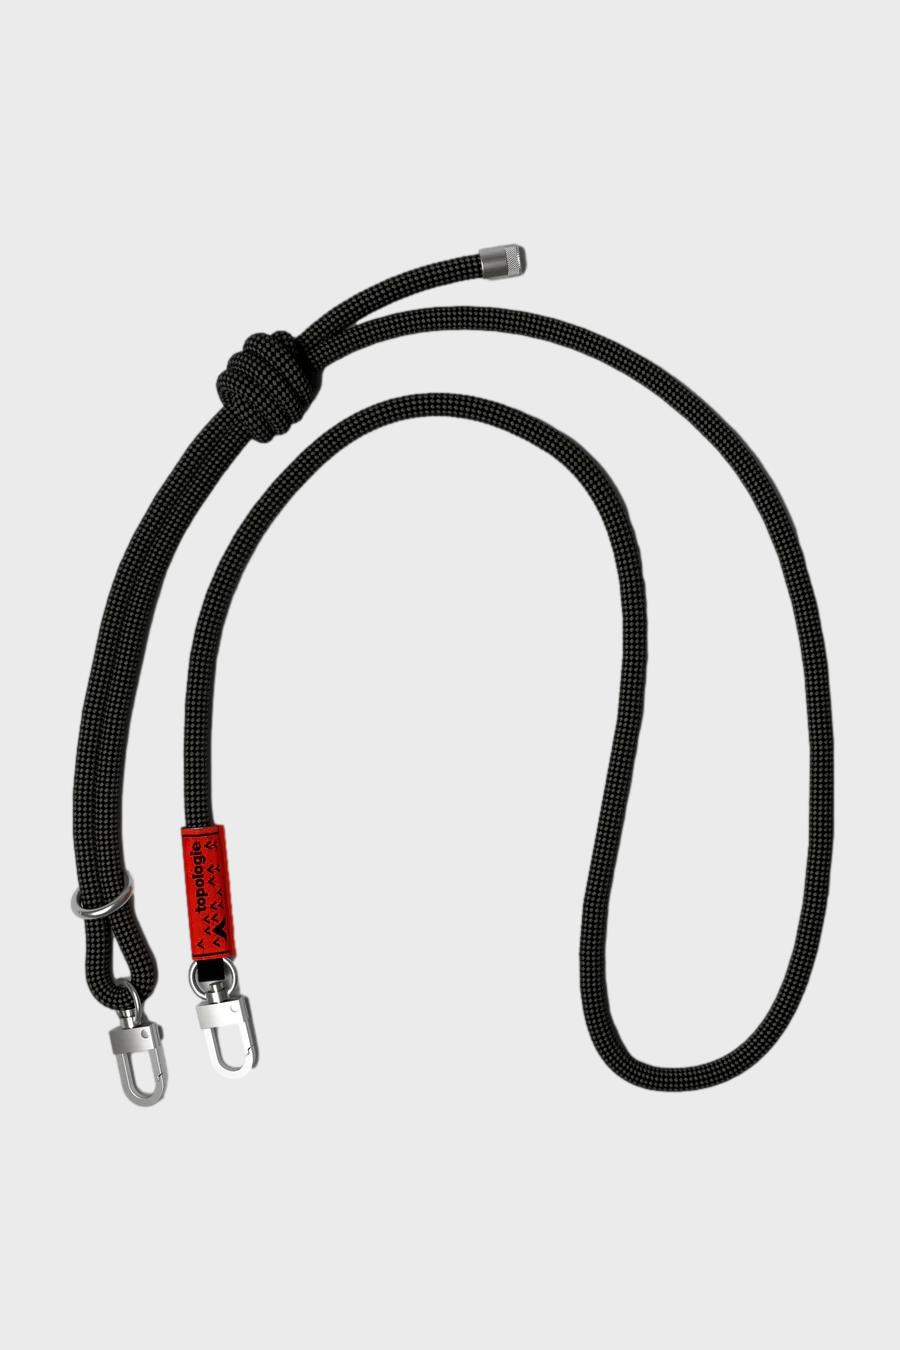 DISTANCE X TOPOLOGIE - WARE STRAP 8mm ROPE STRAP